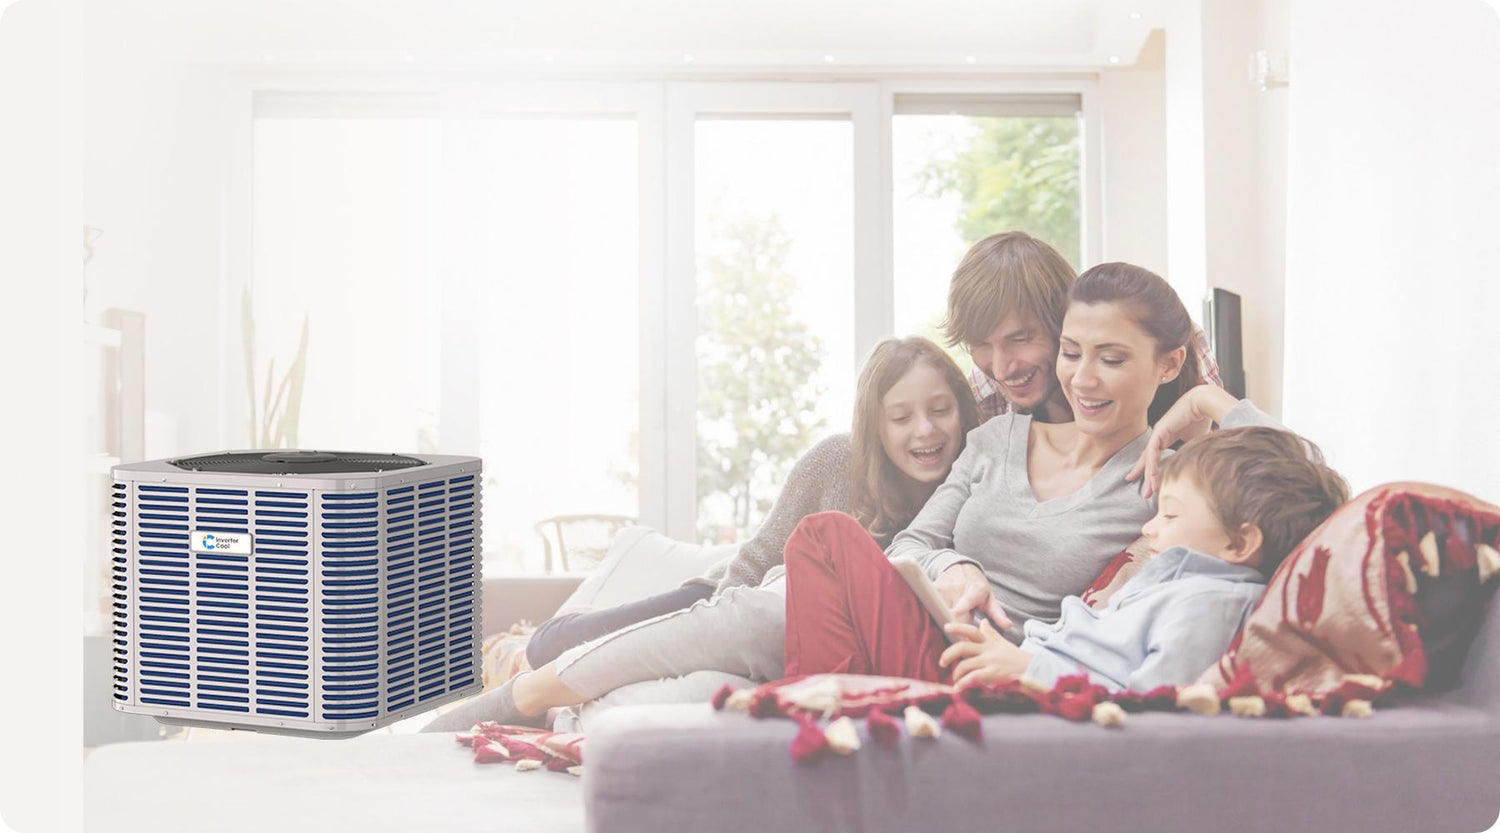 A family has a relaxing and happy time at home with an inverter heat pump.